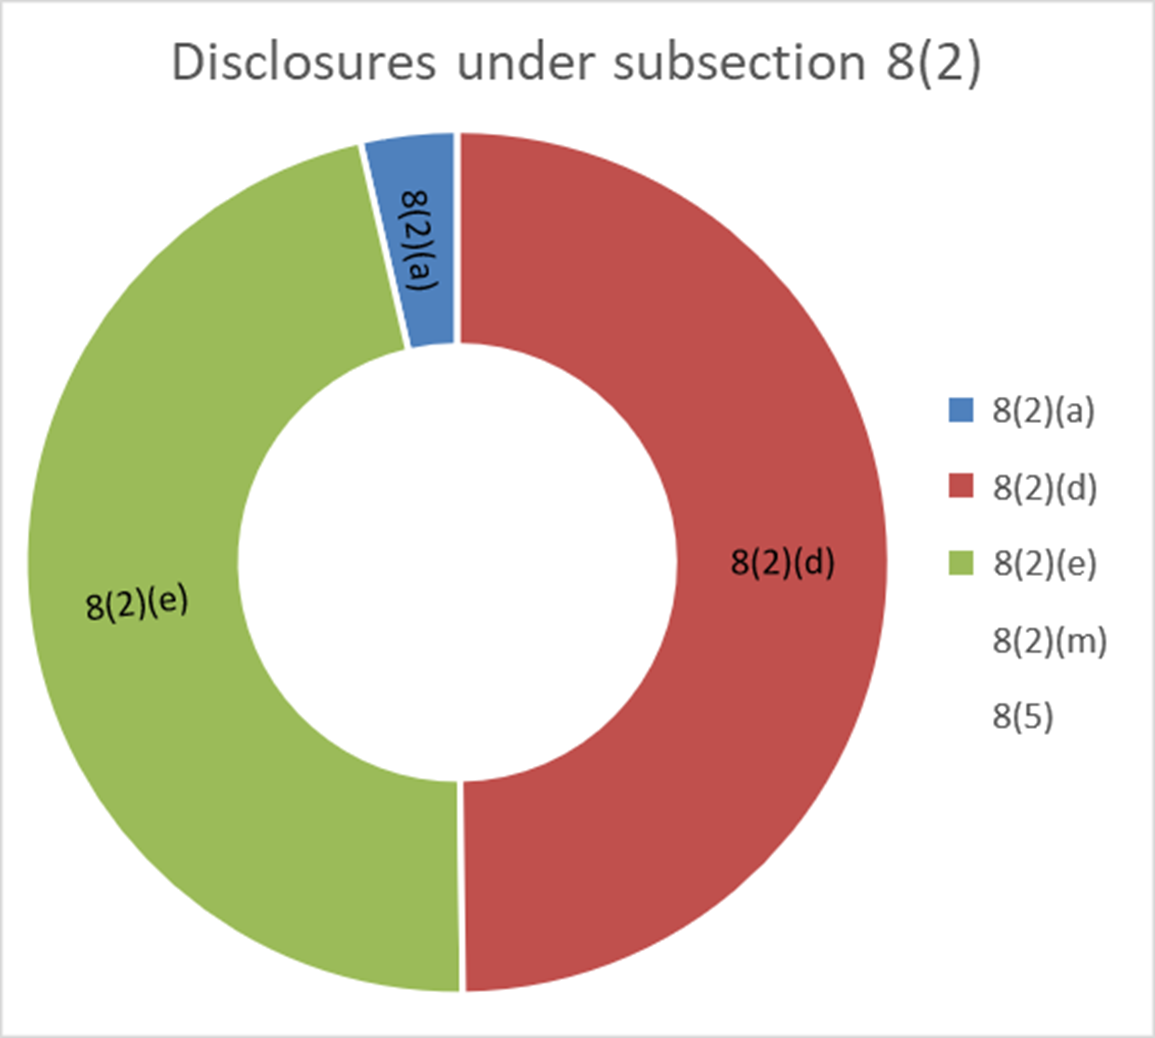 Section 4: Disclosures under subsections 8(2) and 8(5)